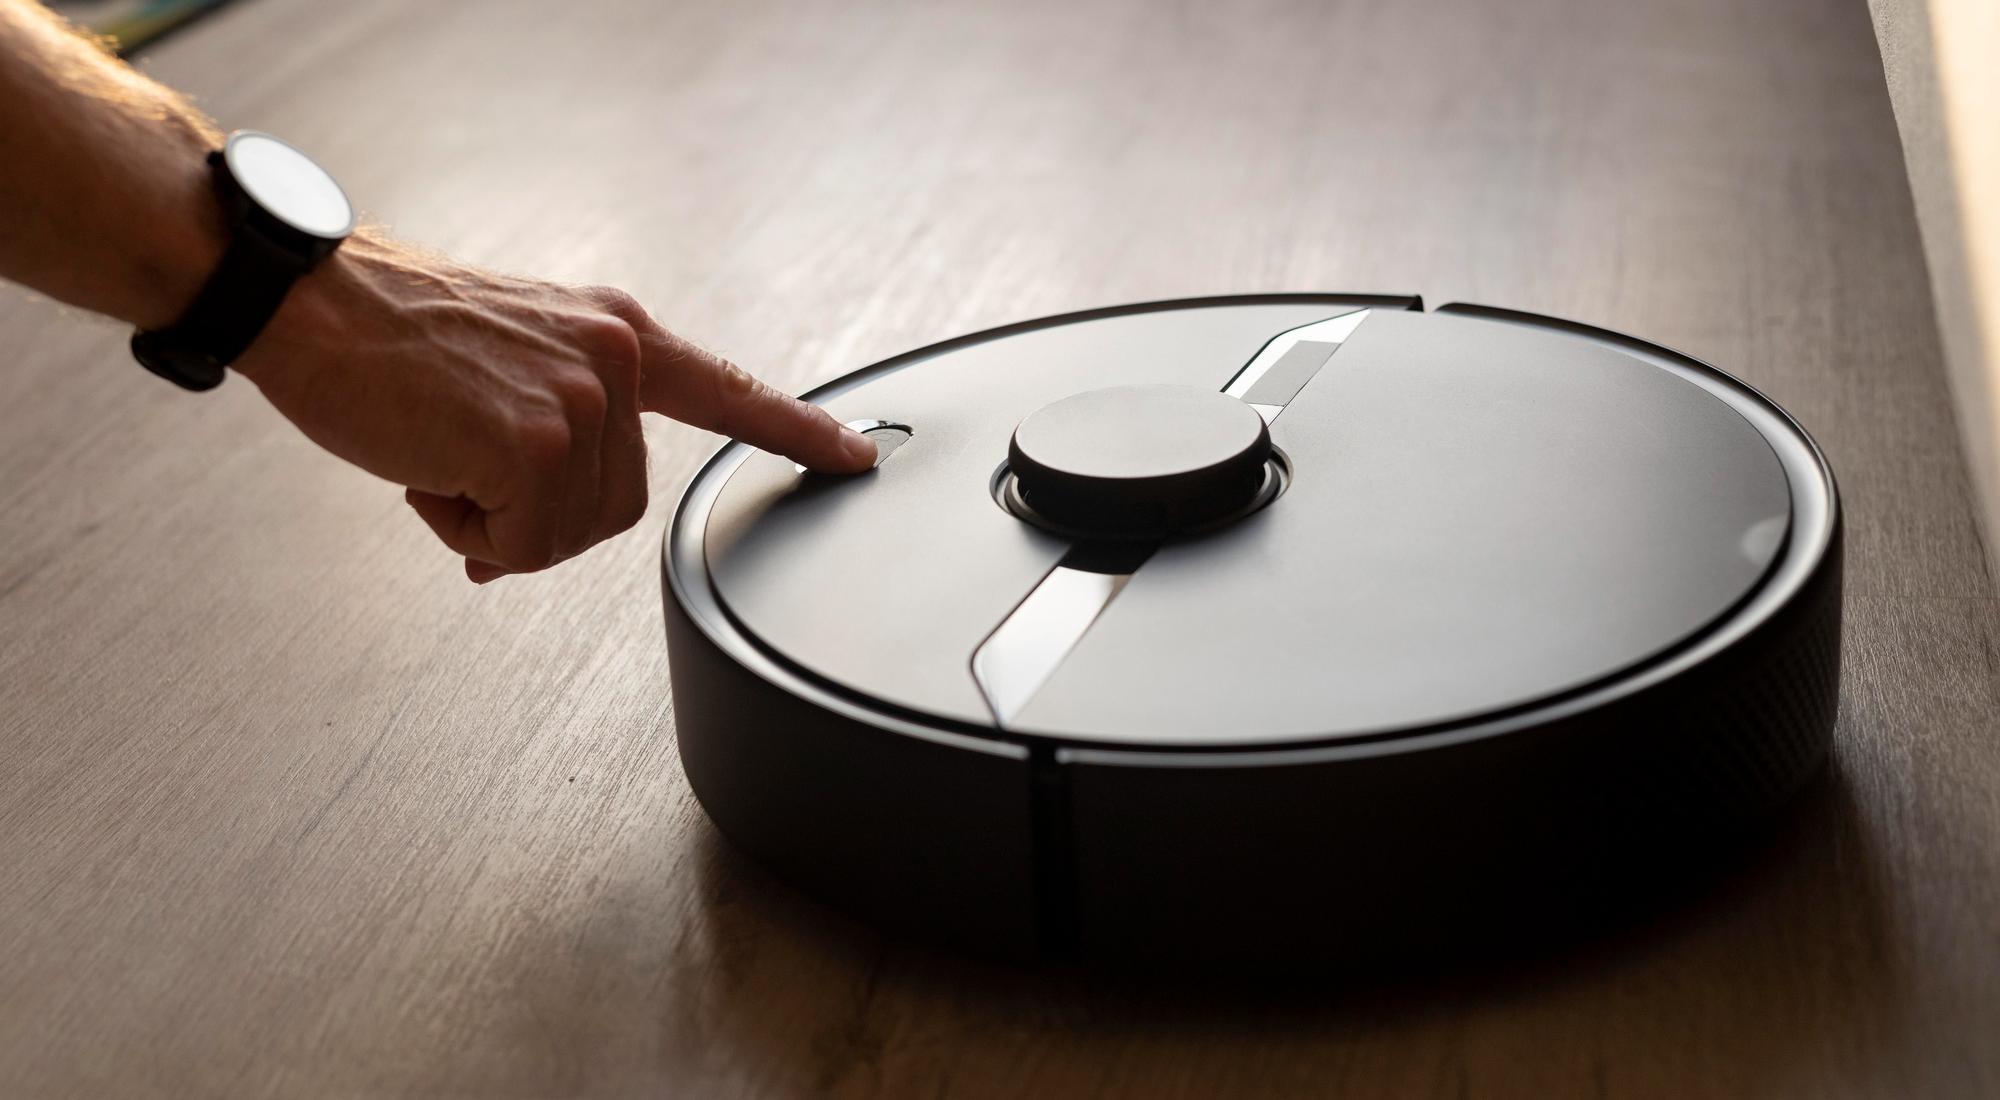 A Buyer's Guide: Factors to Consider When Purchasing a Robot Vacuum